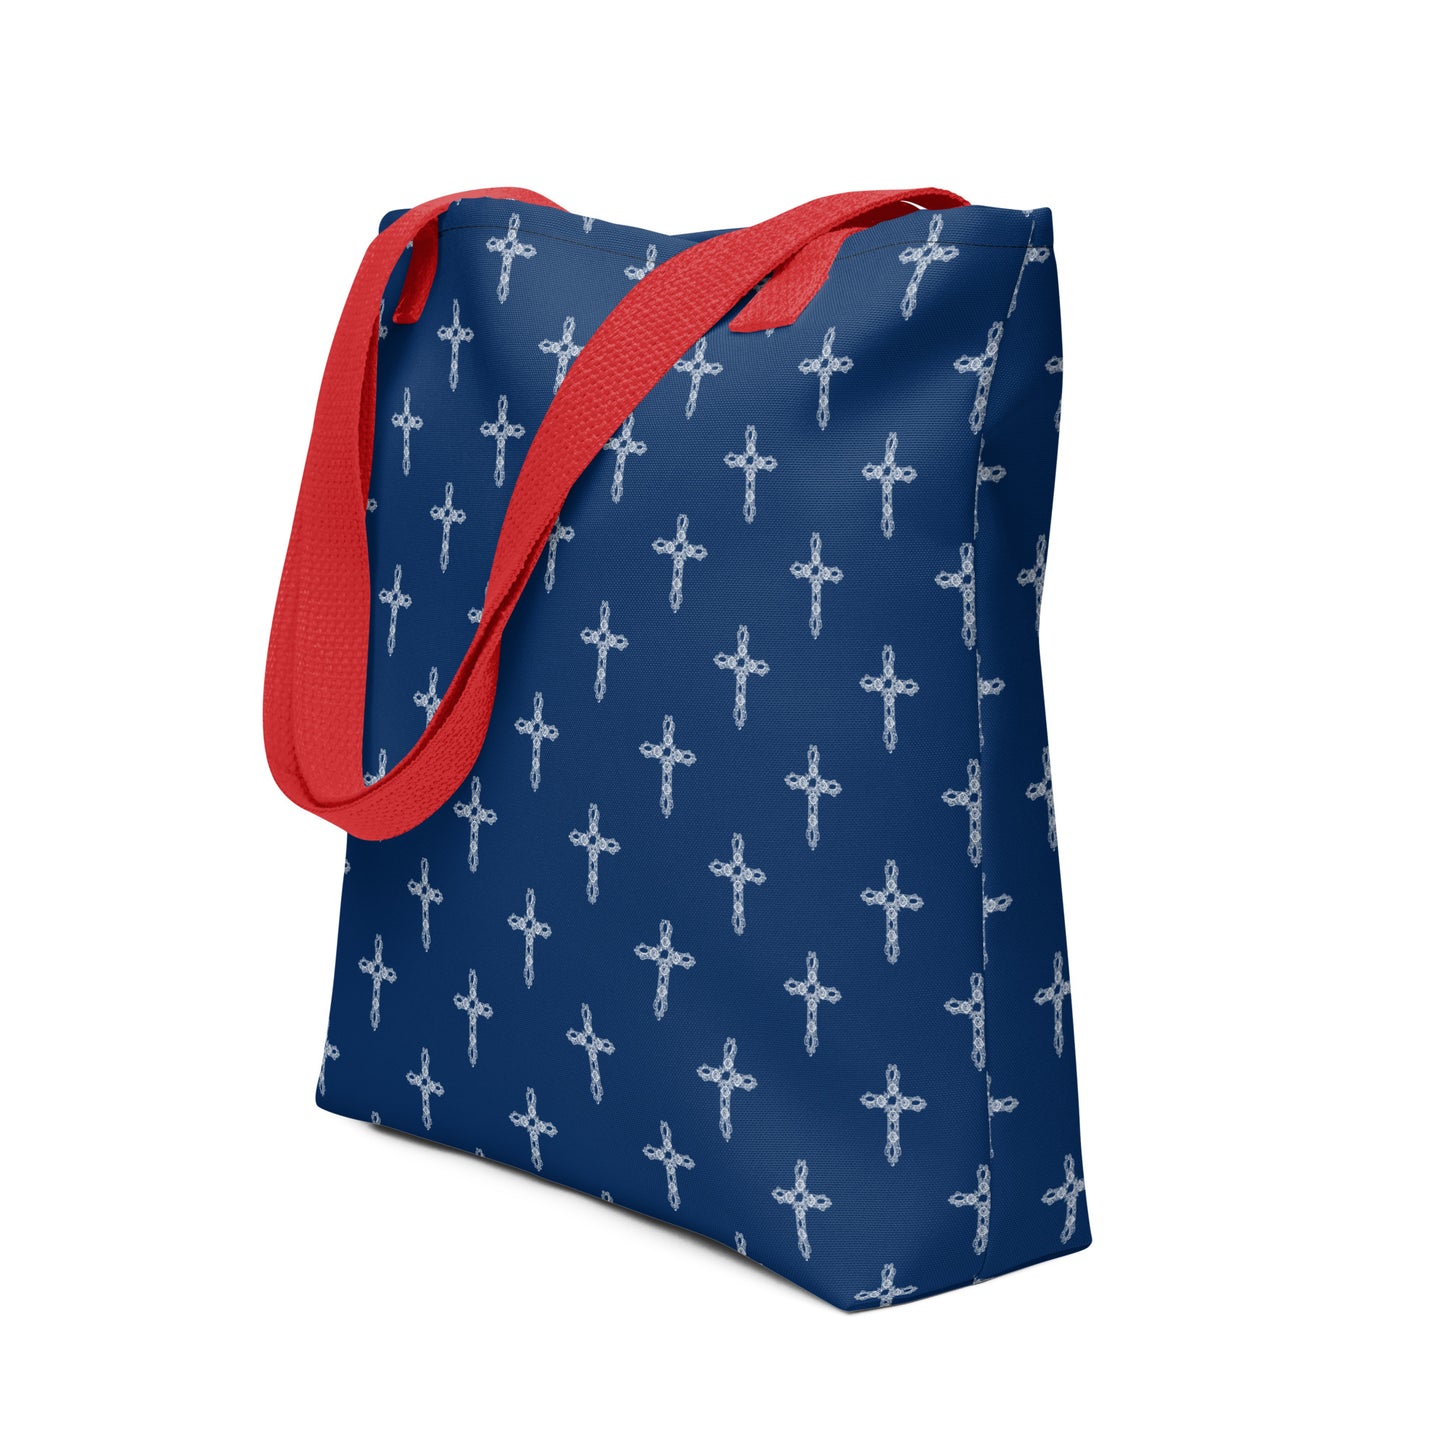 Navy blue purse with red handles. There is a pattern of white crosses on the tote bag or purse.